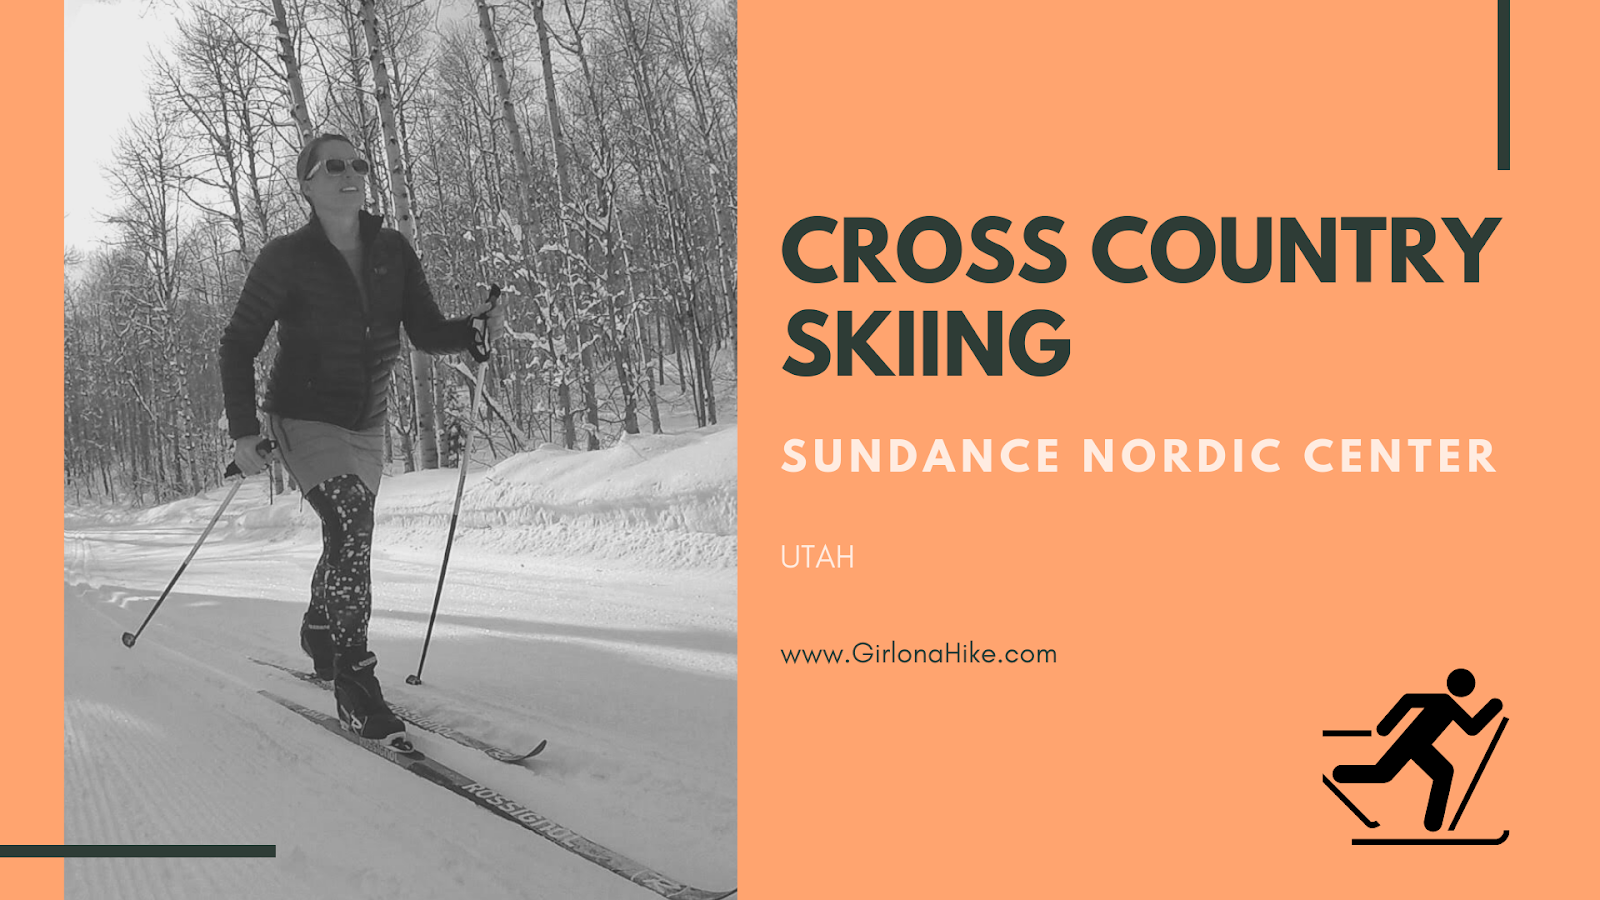 Cross Country Skiing at Sundance Nordic Center!